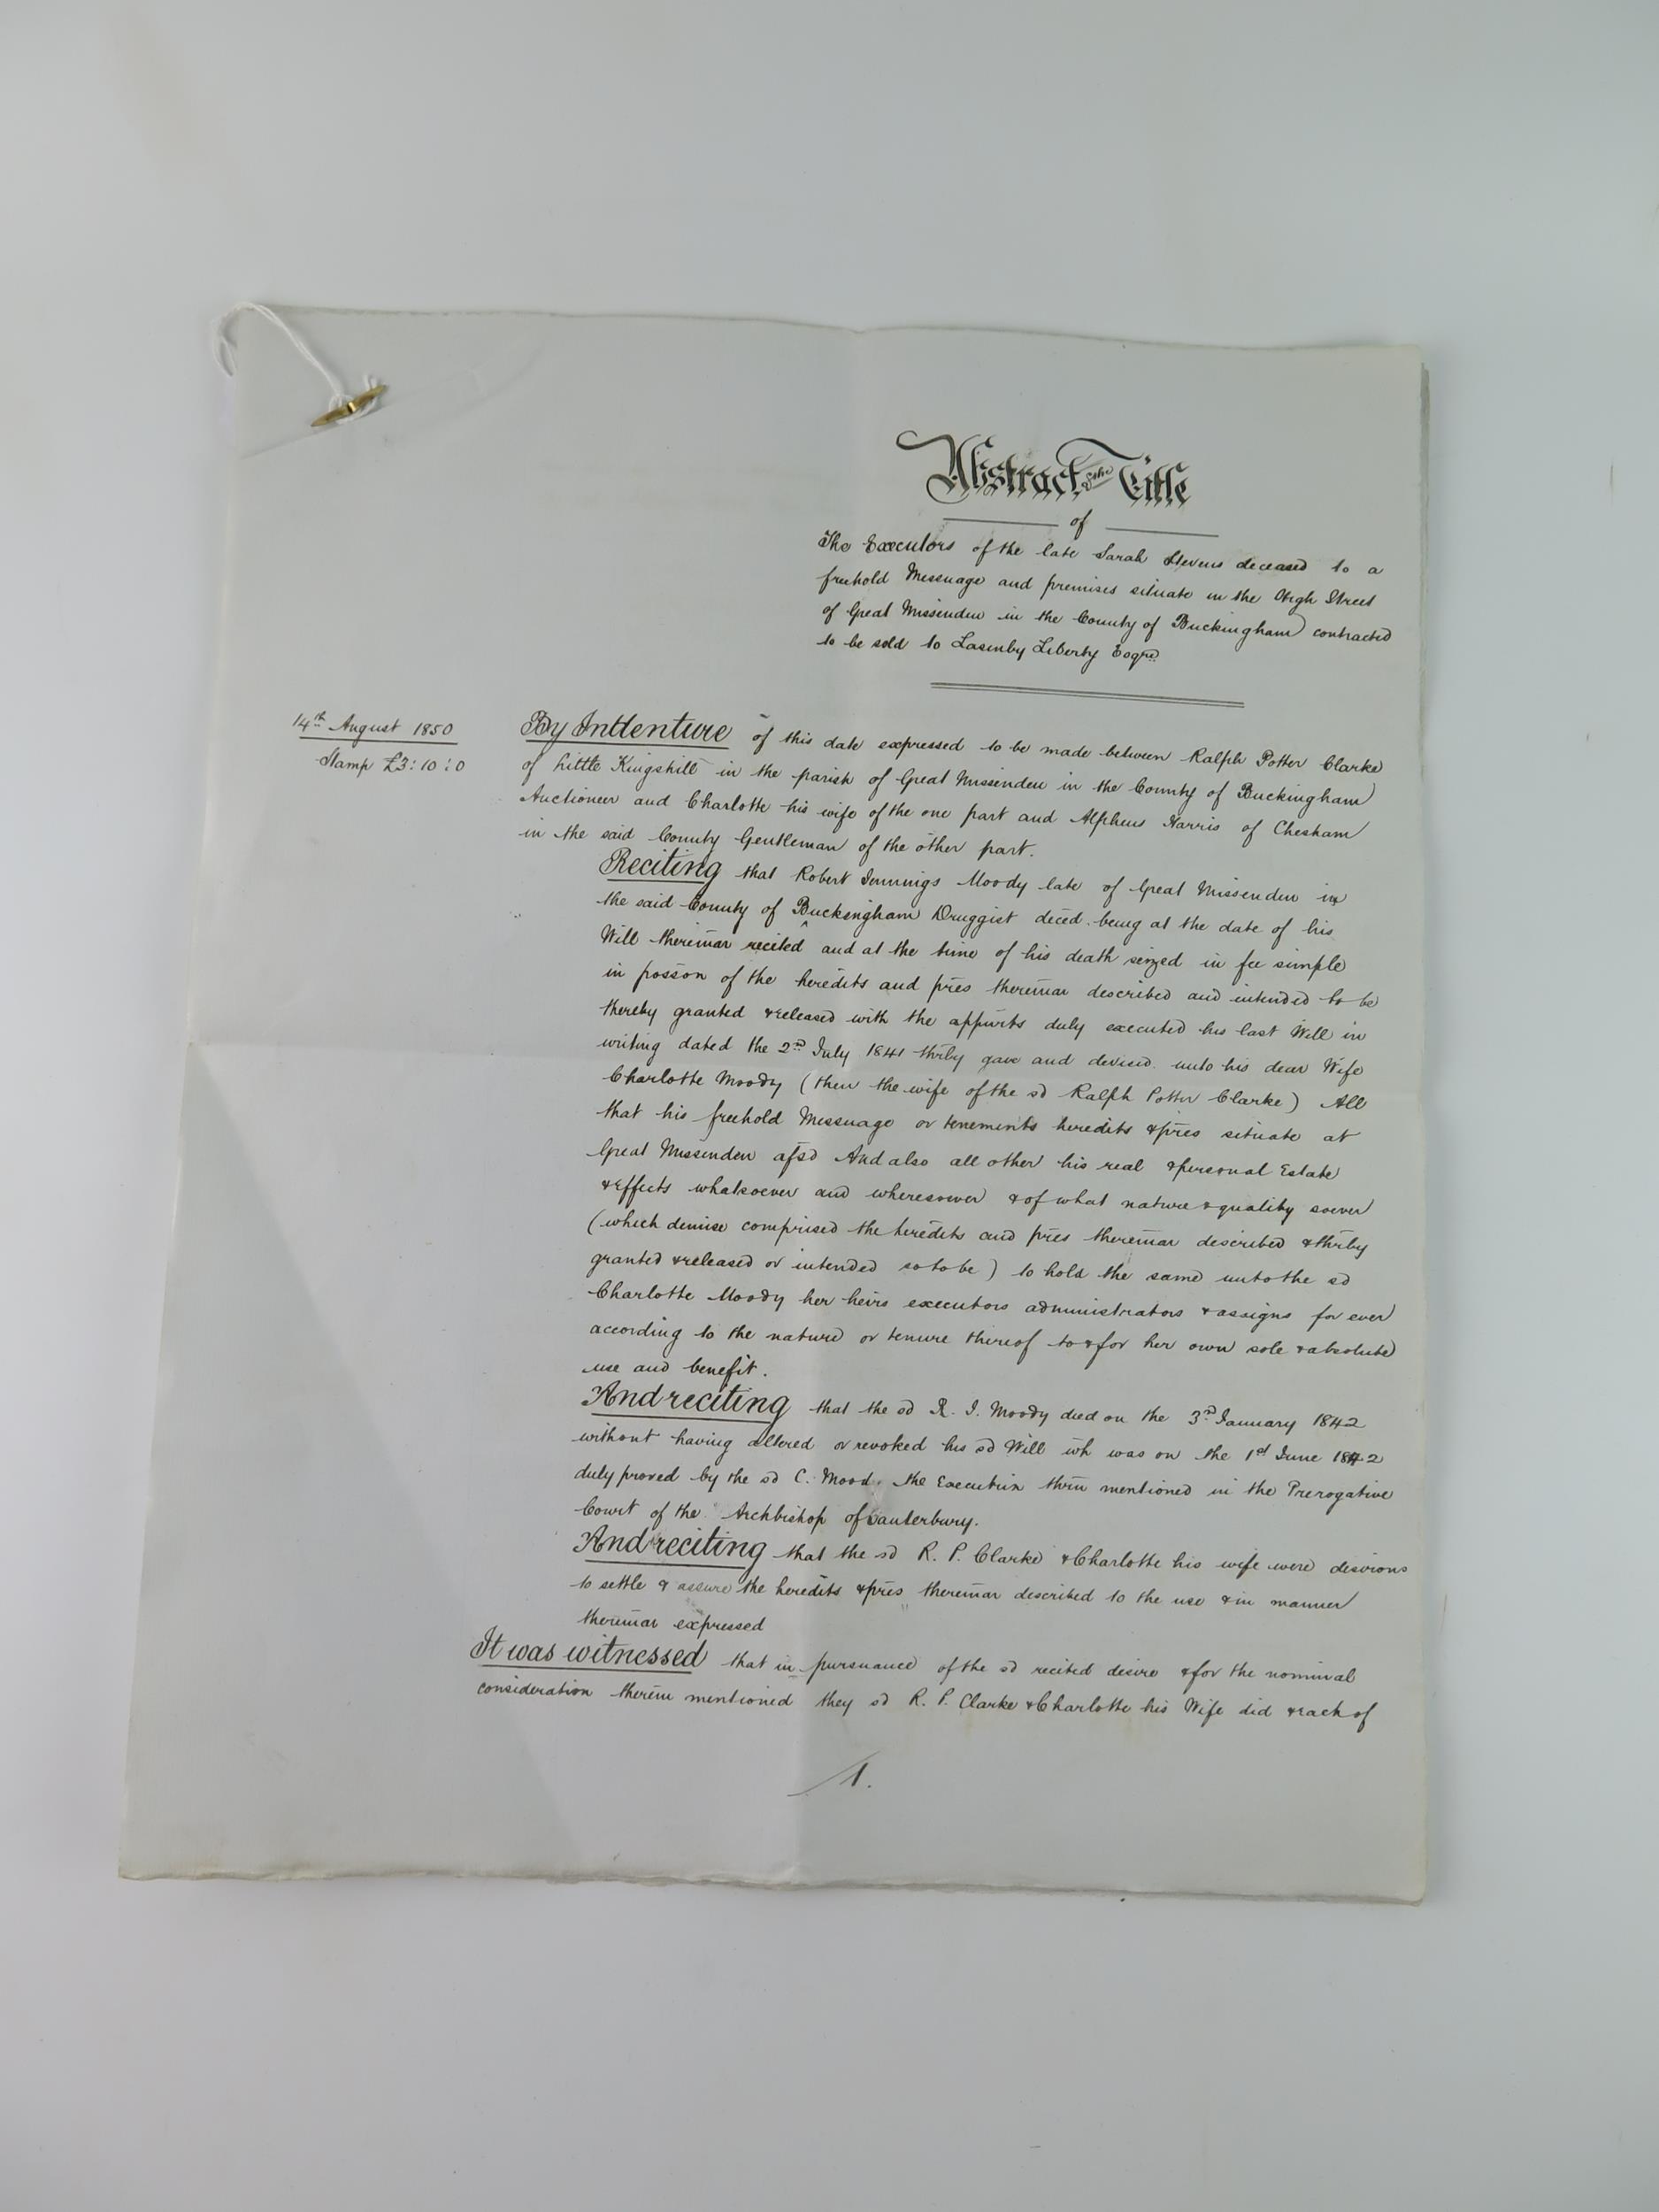 A Victorian mortgage for sale of land in the County of Buckingham. dated 14th August 1850.10